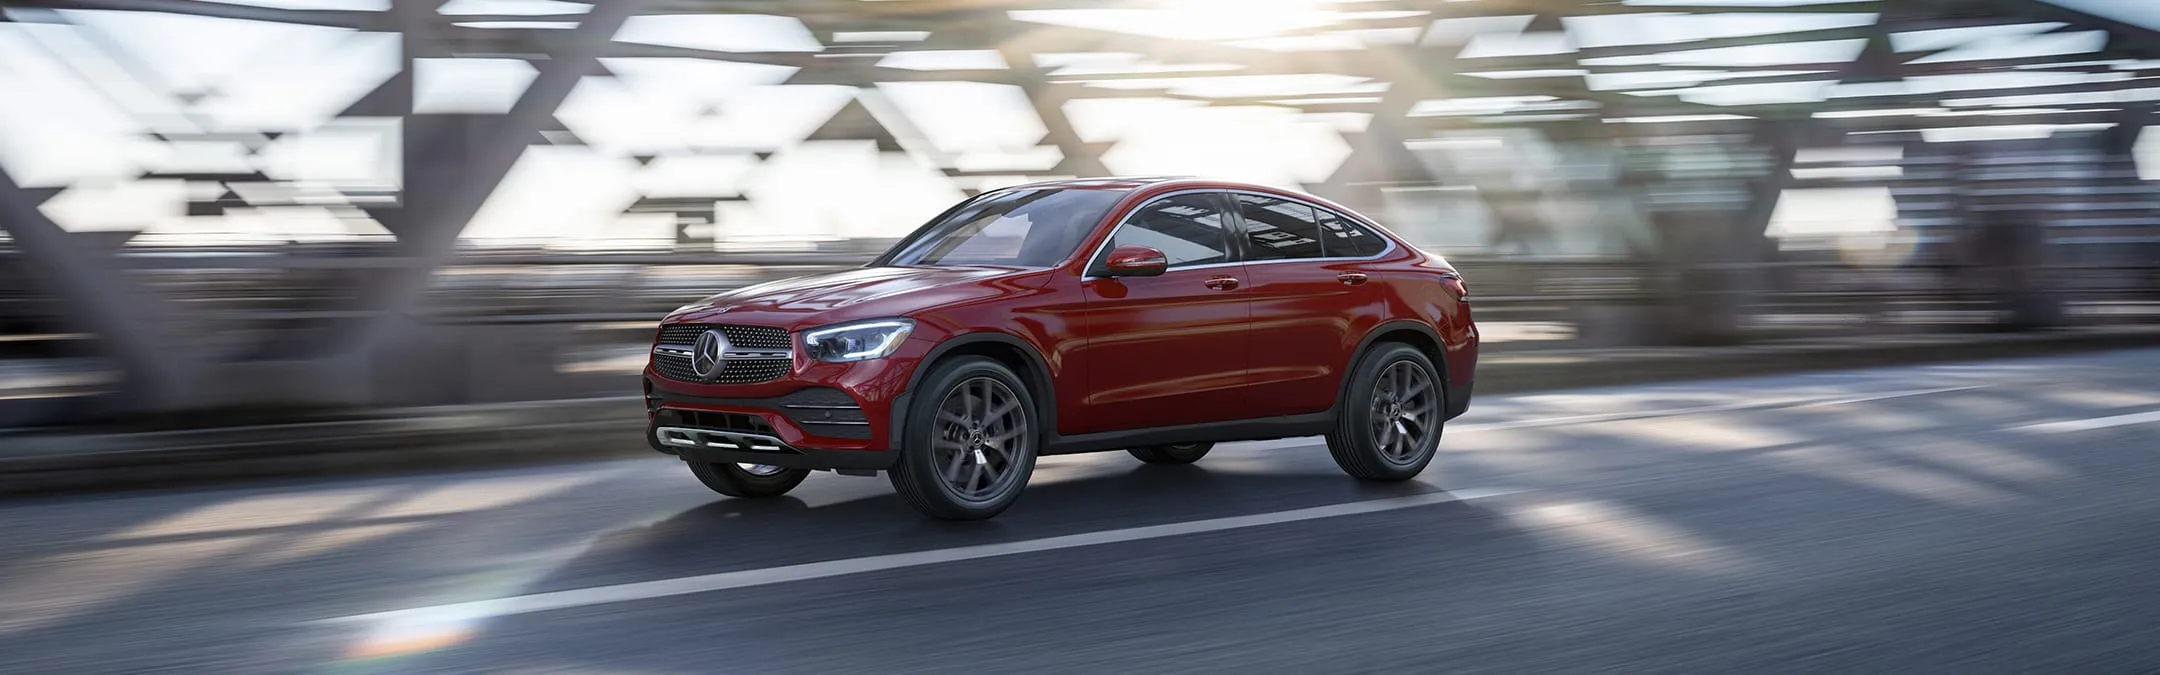 Mercedes-Benz GLC Coupe, Page 2